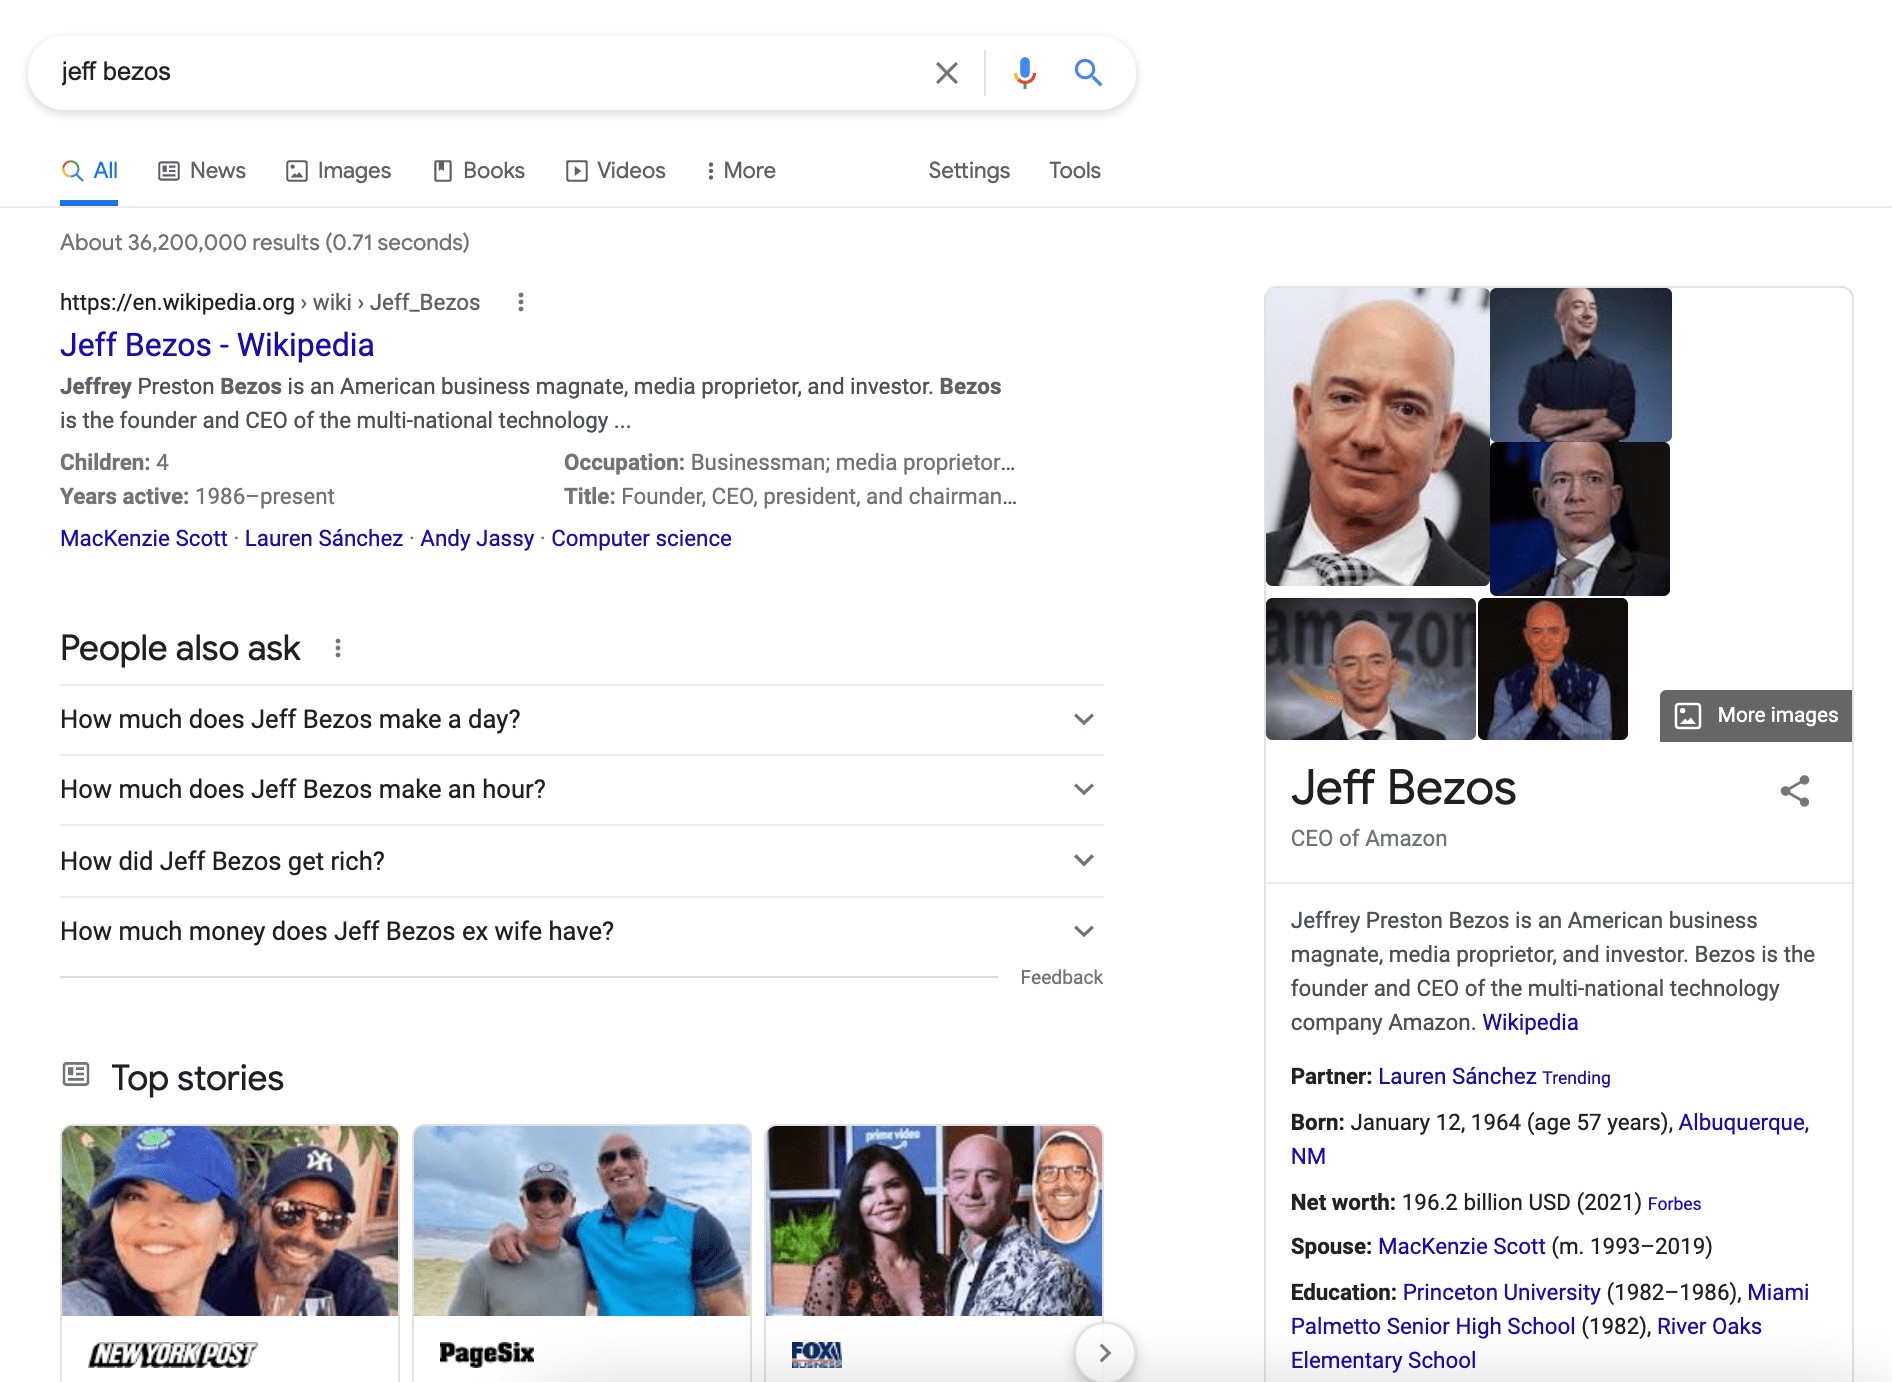 search results for the search term jeff bezos as an example of semantic search